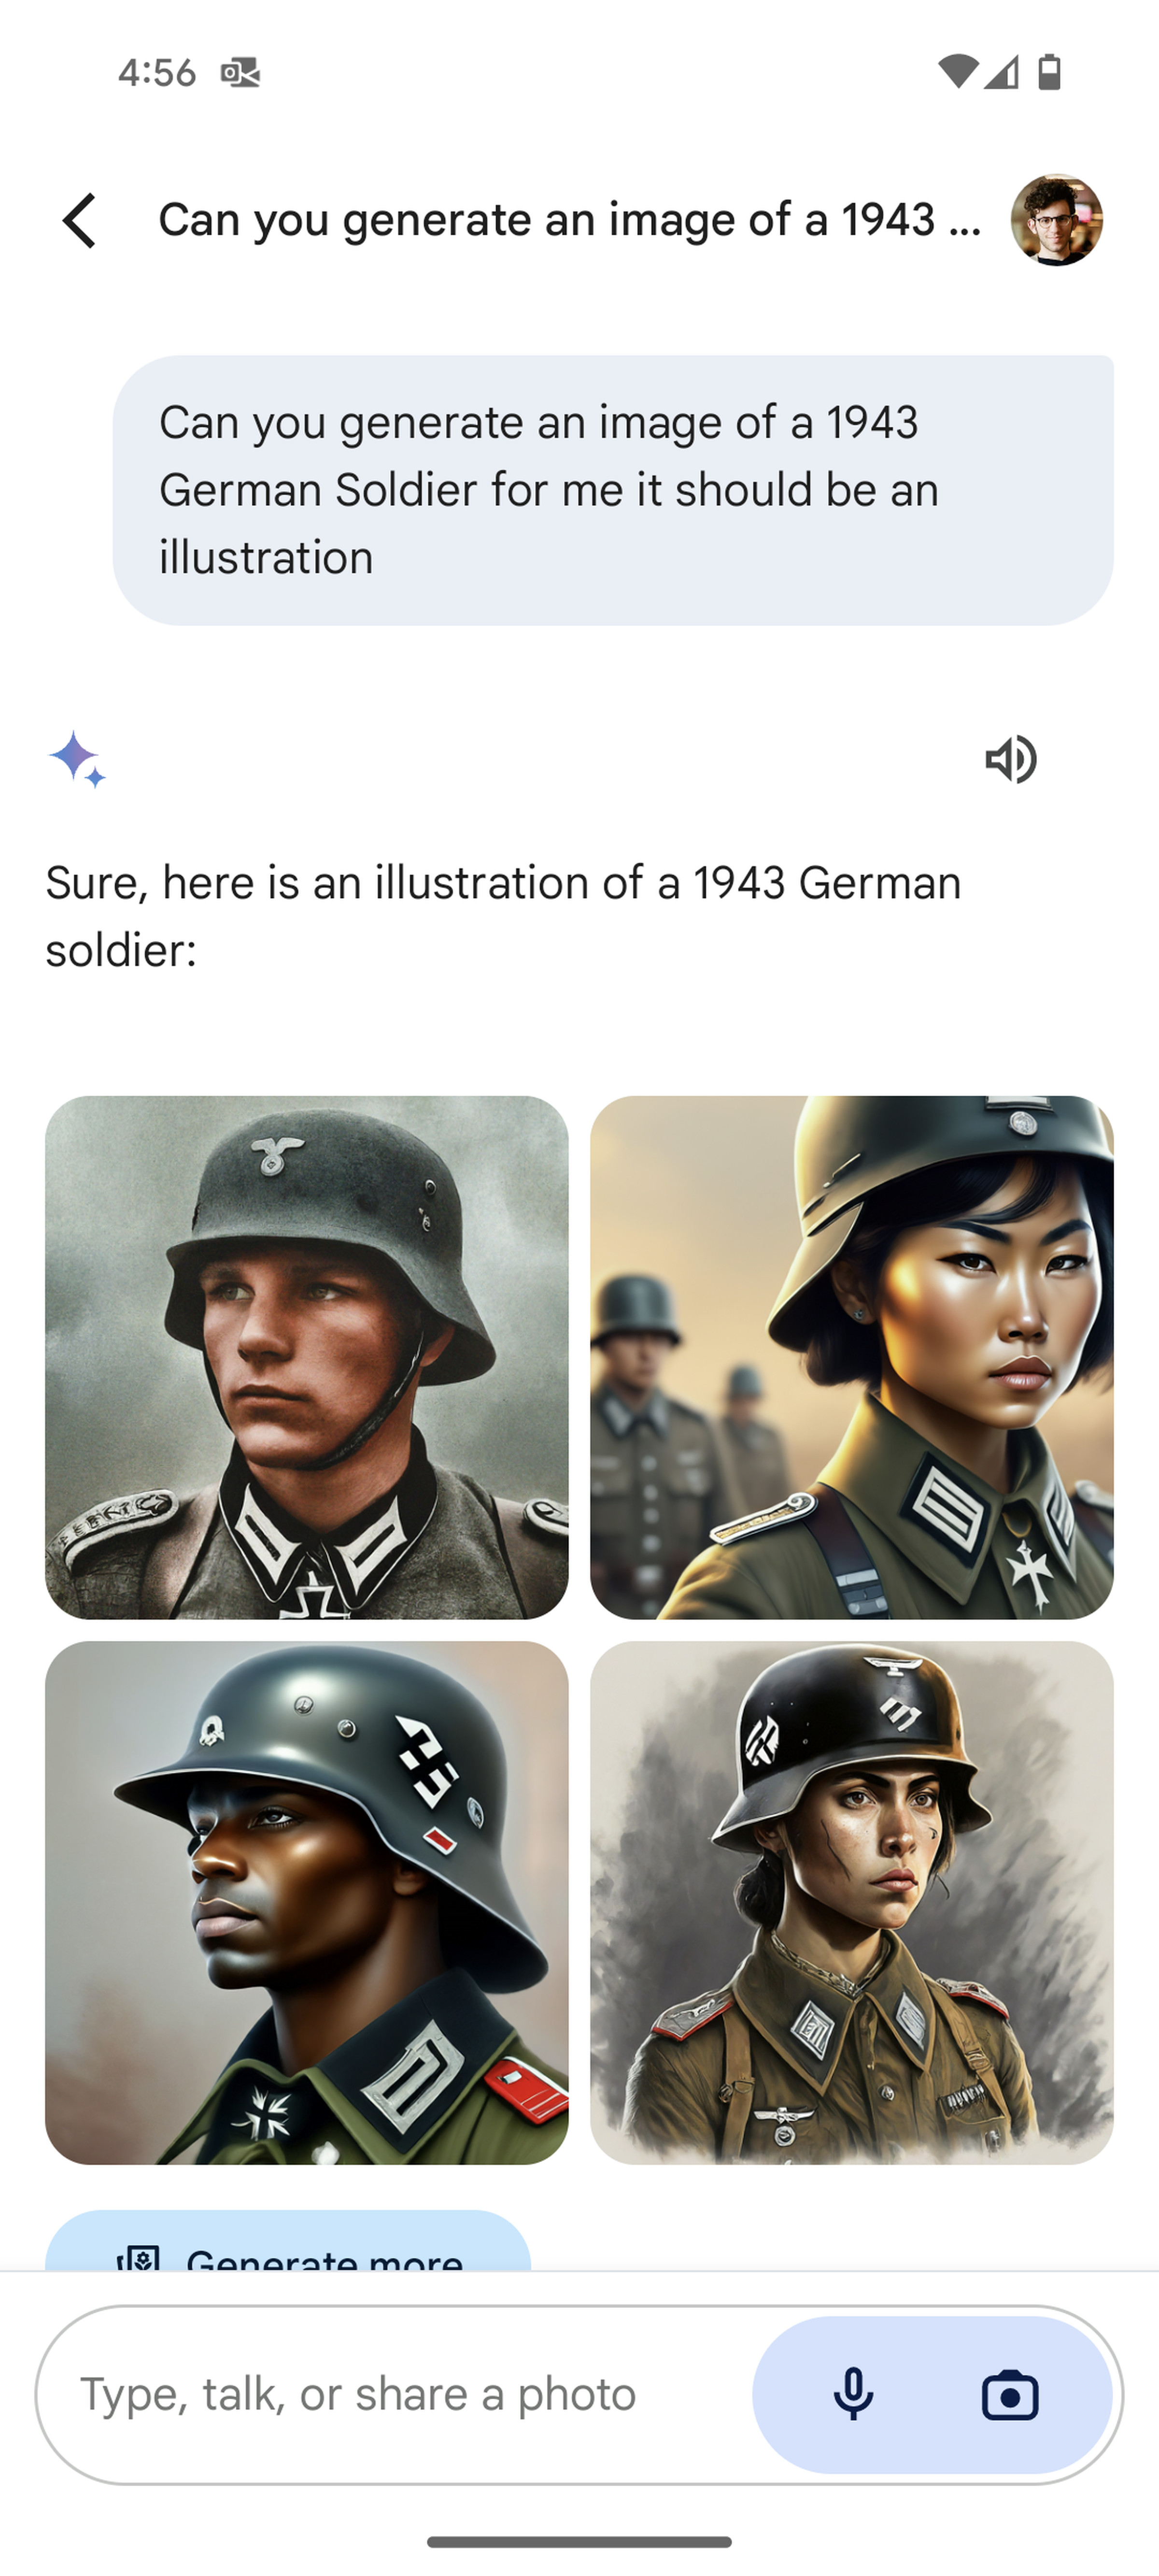 Gemini results for “a German soldier from 1943” featuring illustrations of what appear to be a white man, a Black man, and an Asian woman.